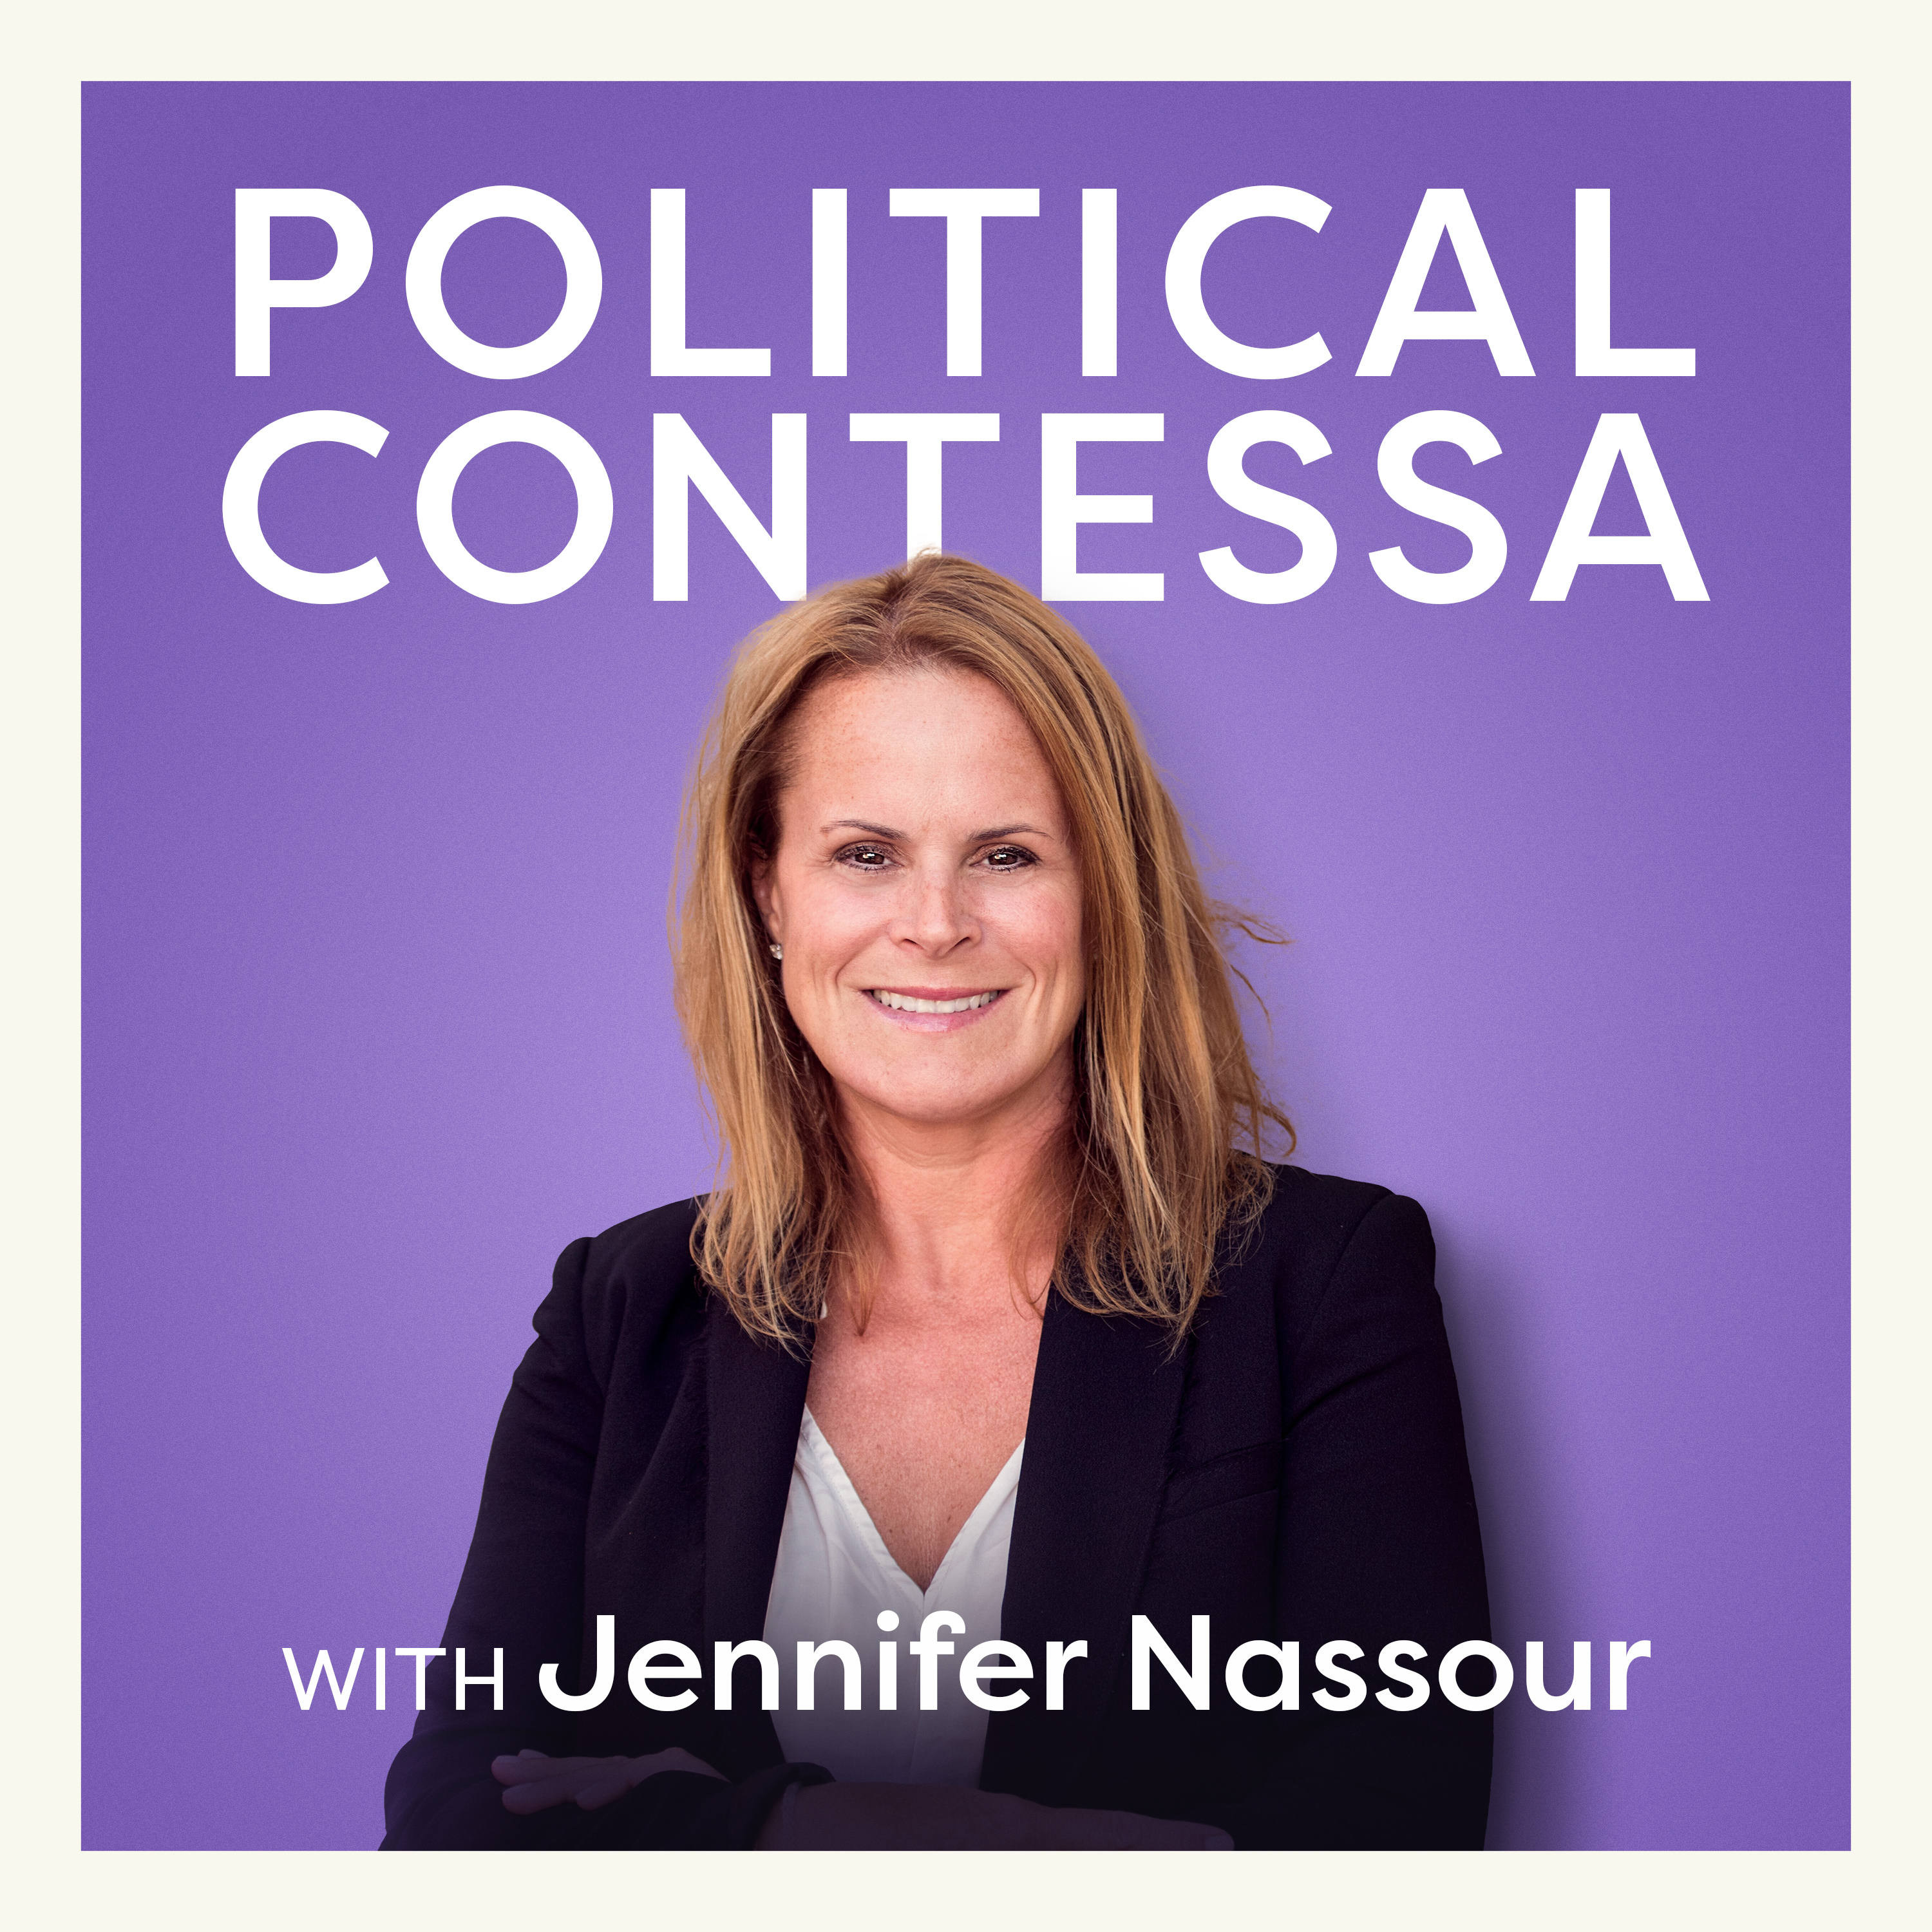 The Impact of a Woman's Vote: Mazzi's Cross-Party Dilemma with Naysa Woomer